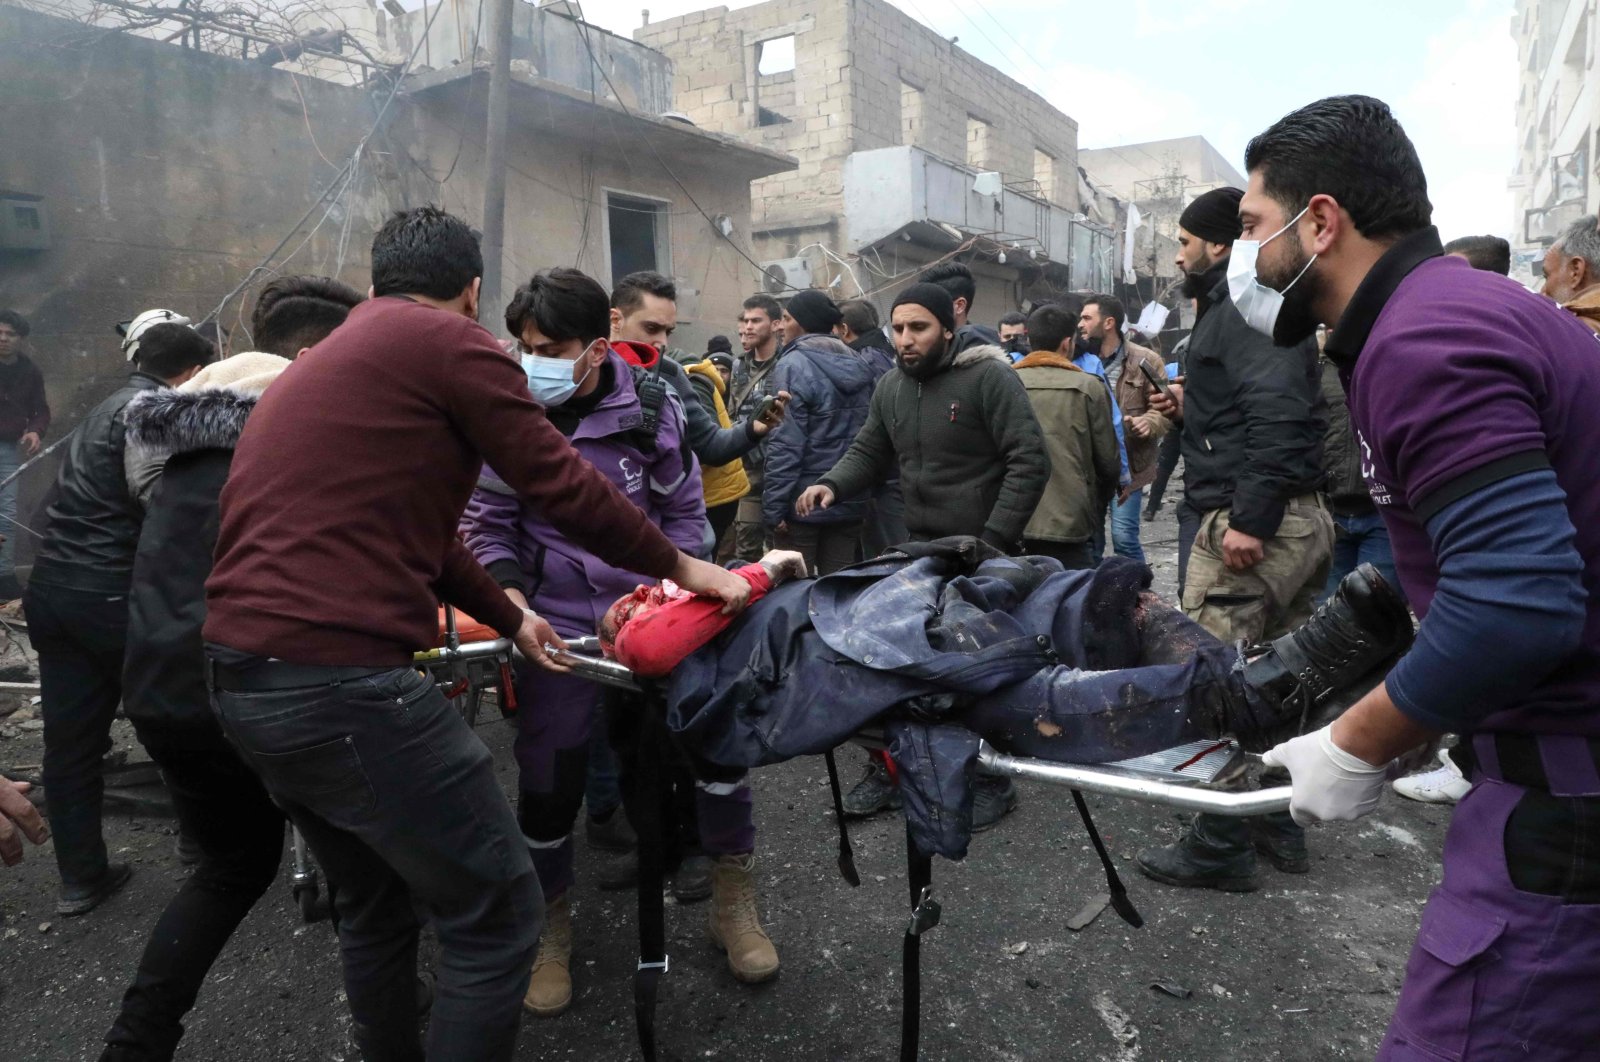 Rescue workers carry away a victim at the scene of an explosion in the town of Azaz in the opposition-controlled northern countryside of Syria's Aleppo province,on January 31, 2021. (AFP Photo)